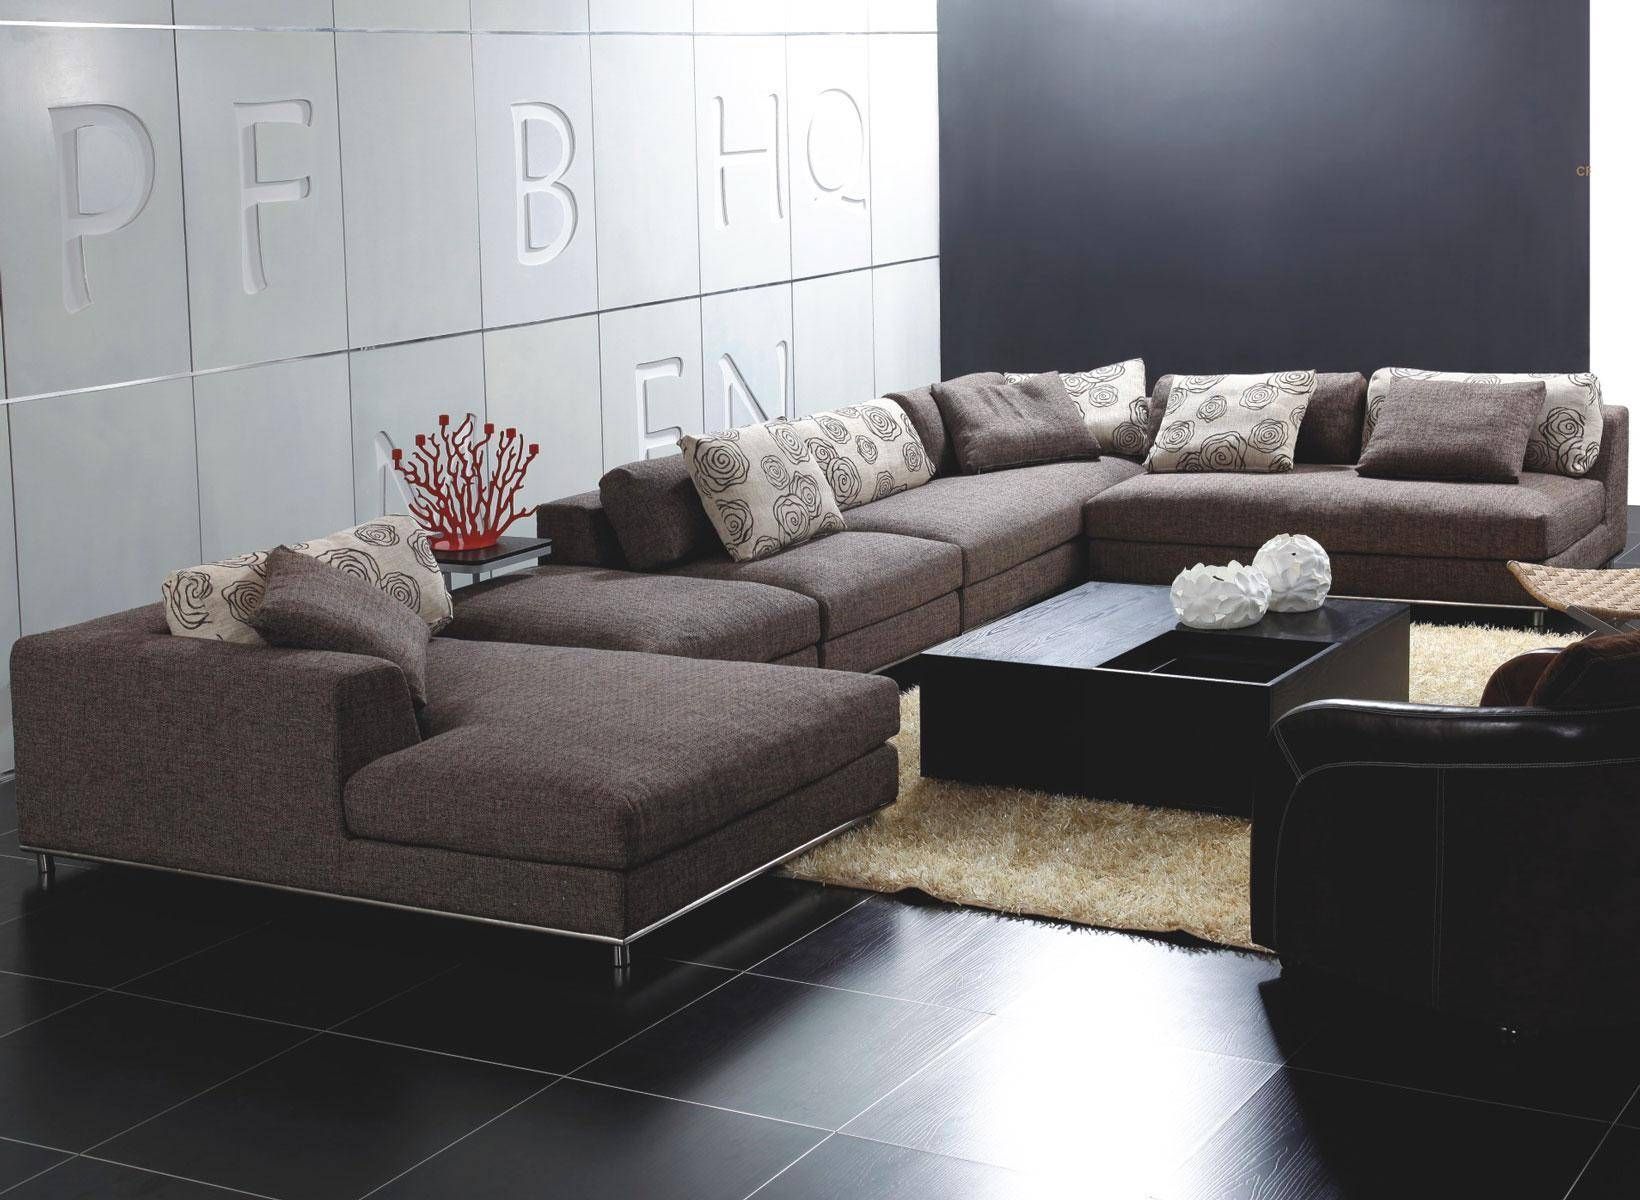 Backless Sectional Sofa – Cleanupflorida Regarding Backless Sectional Sofa (View 1 of 30)